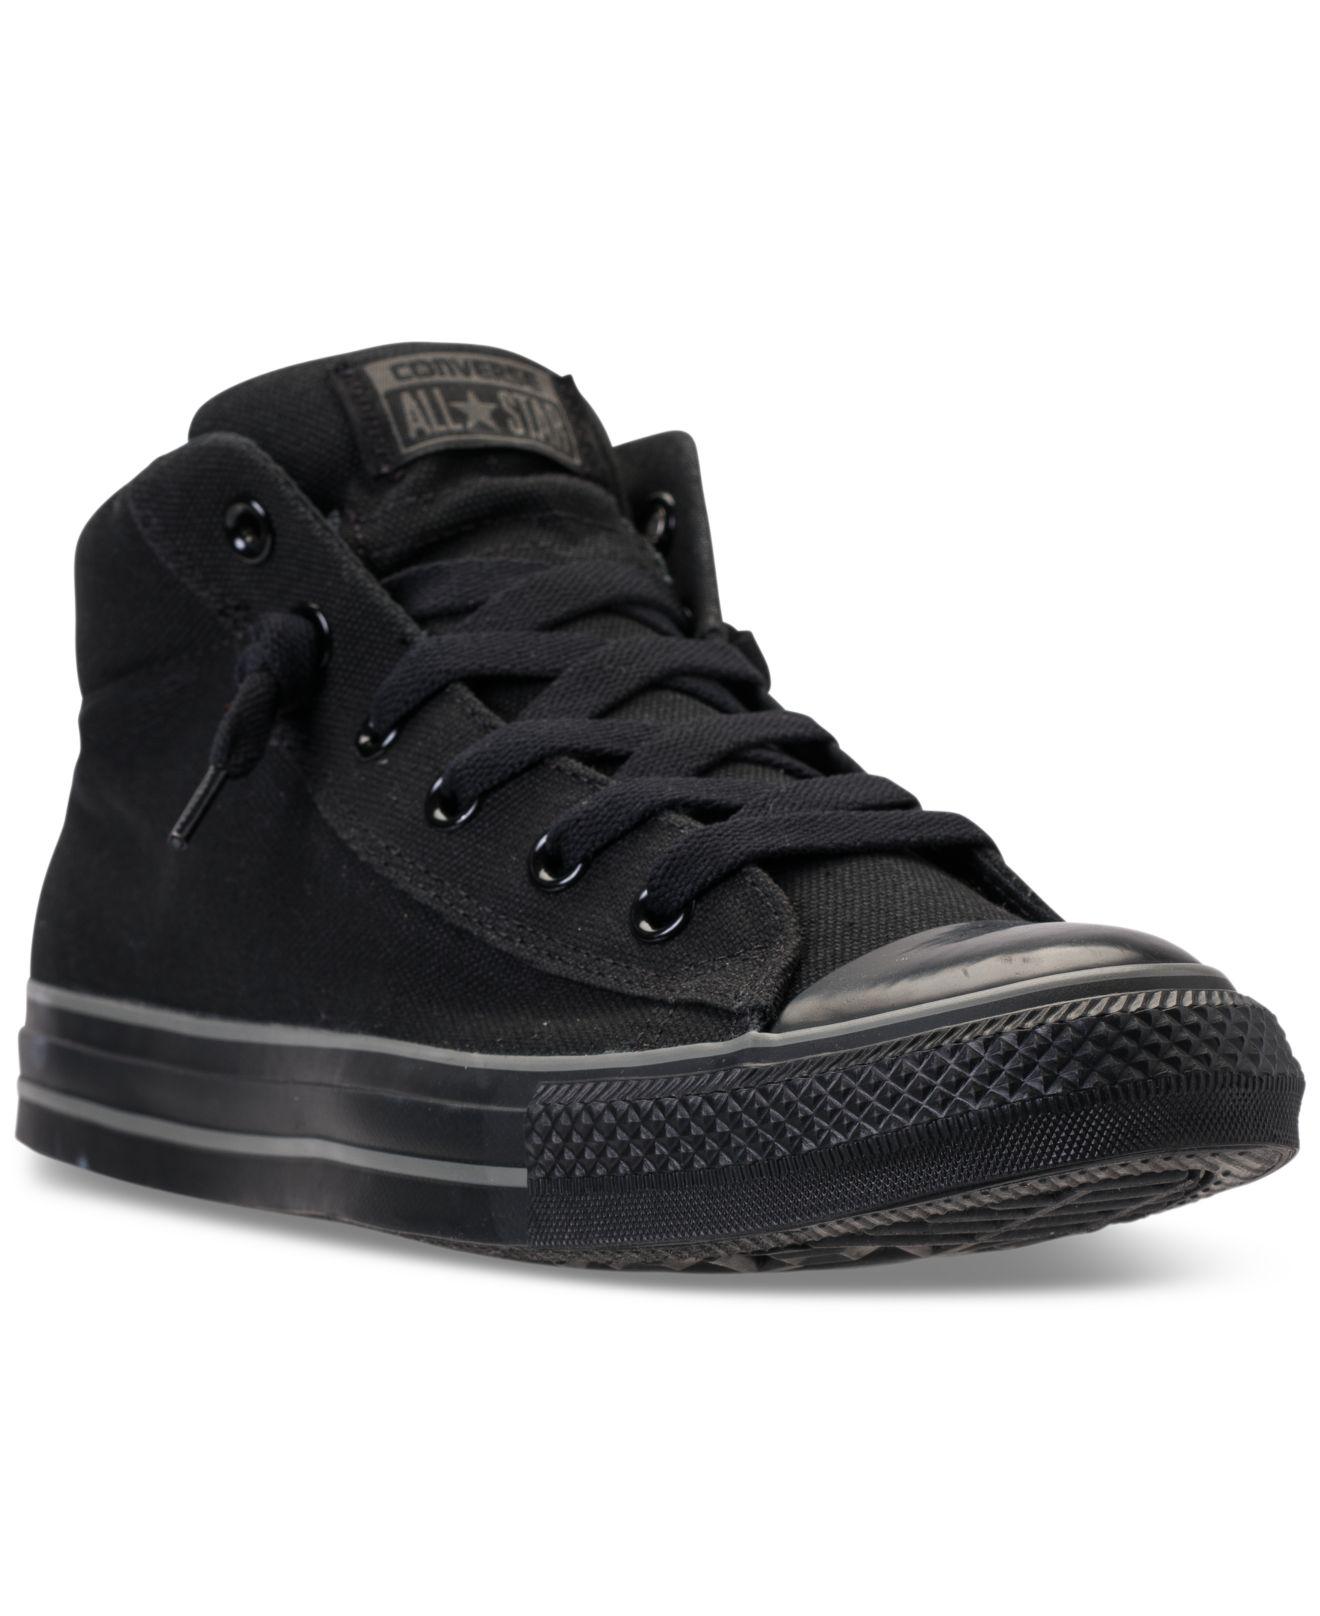 Top 90+ images converse all black mid tops - In.thptnganamst.edu.vn